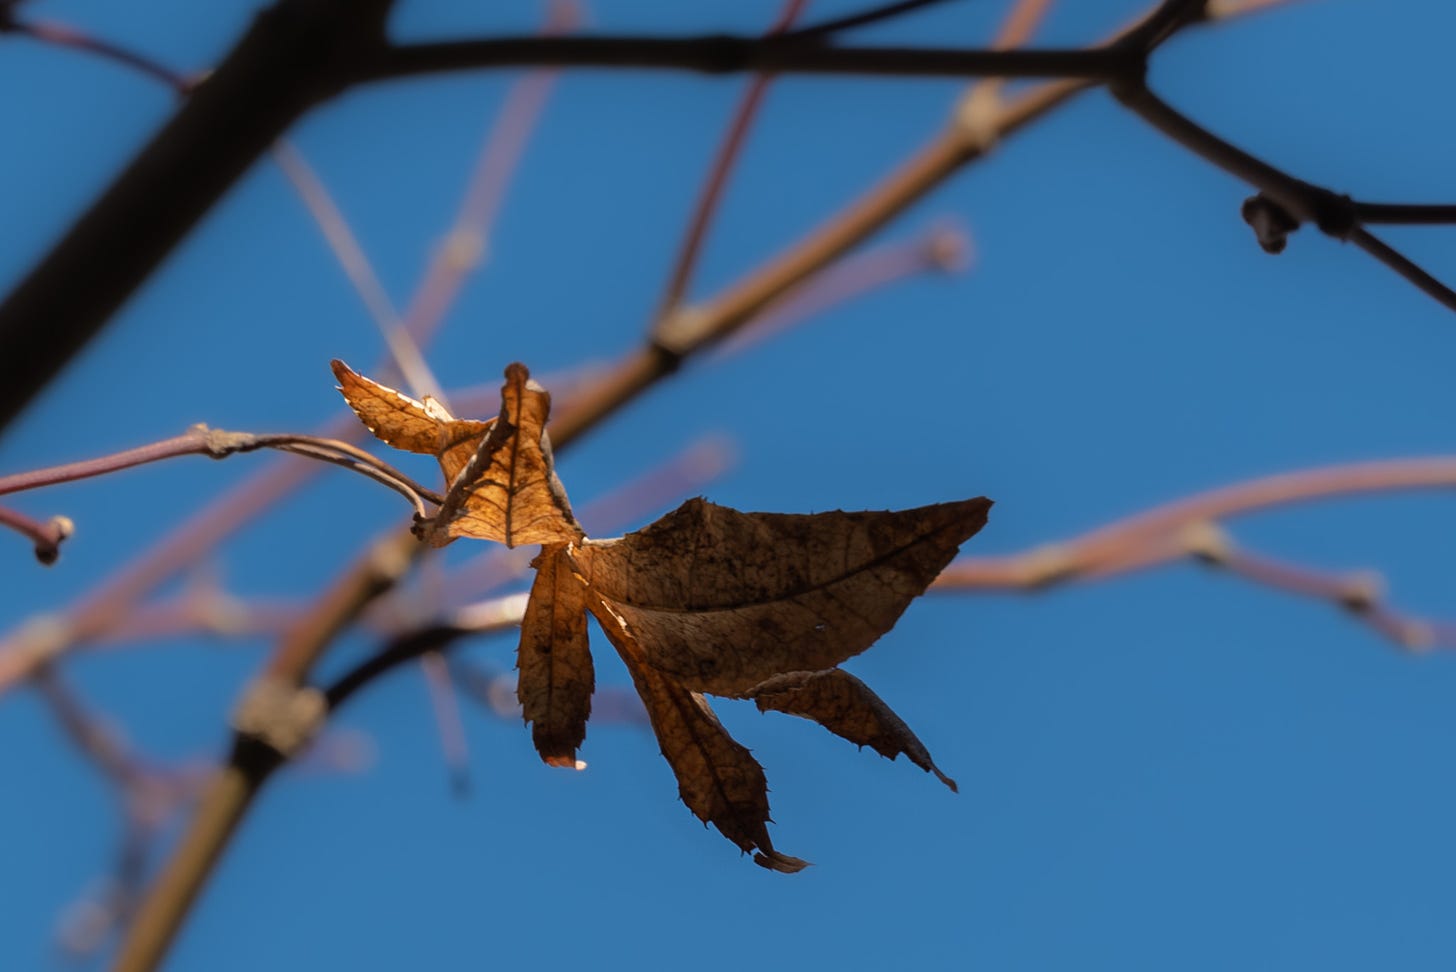 A single maple leaf clings to a branch against a bright blue sky with limbs blurred behind it